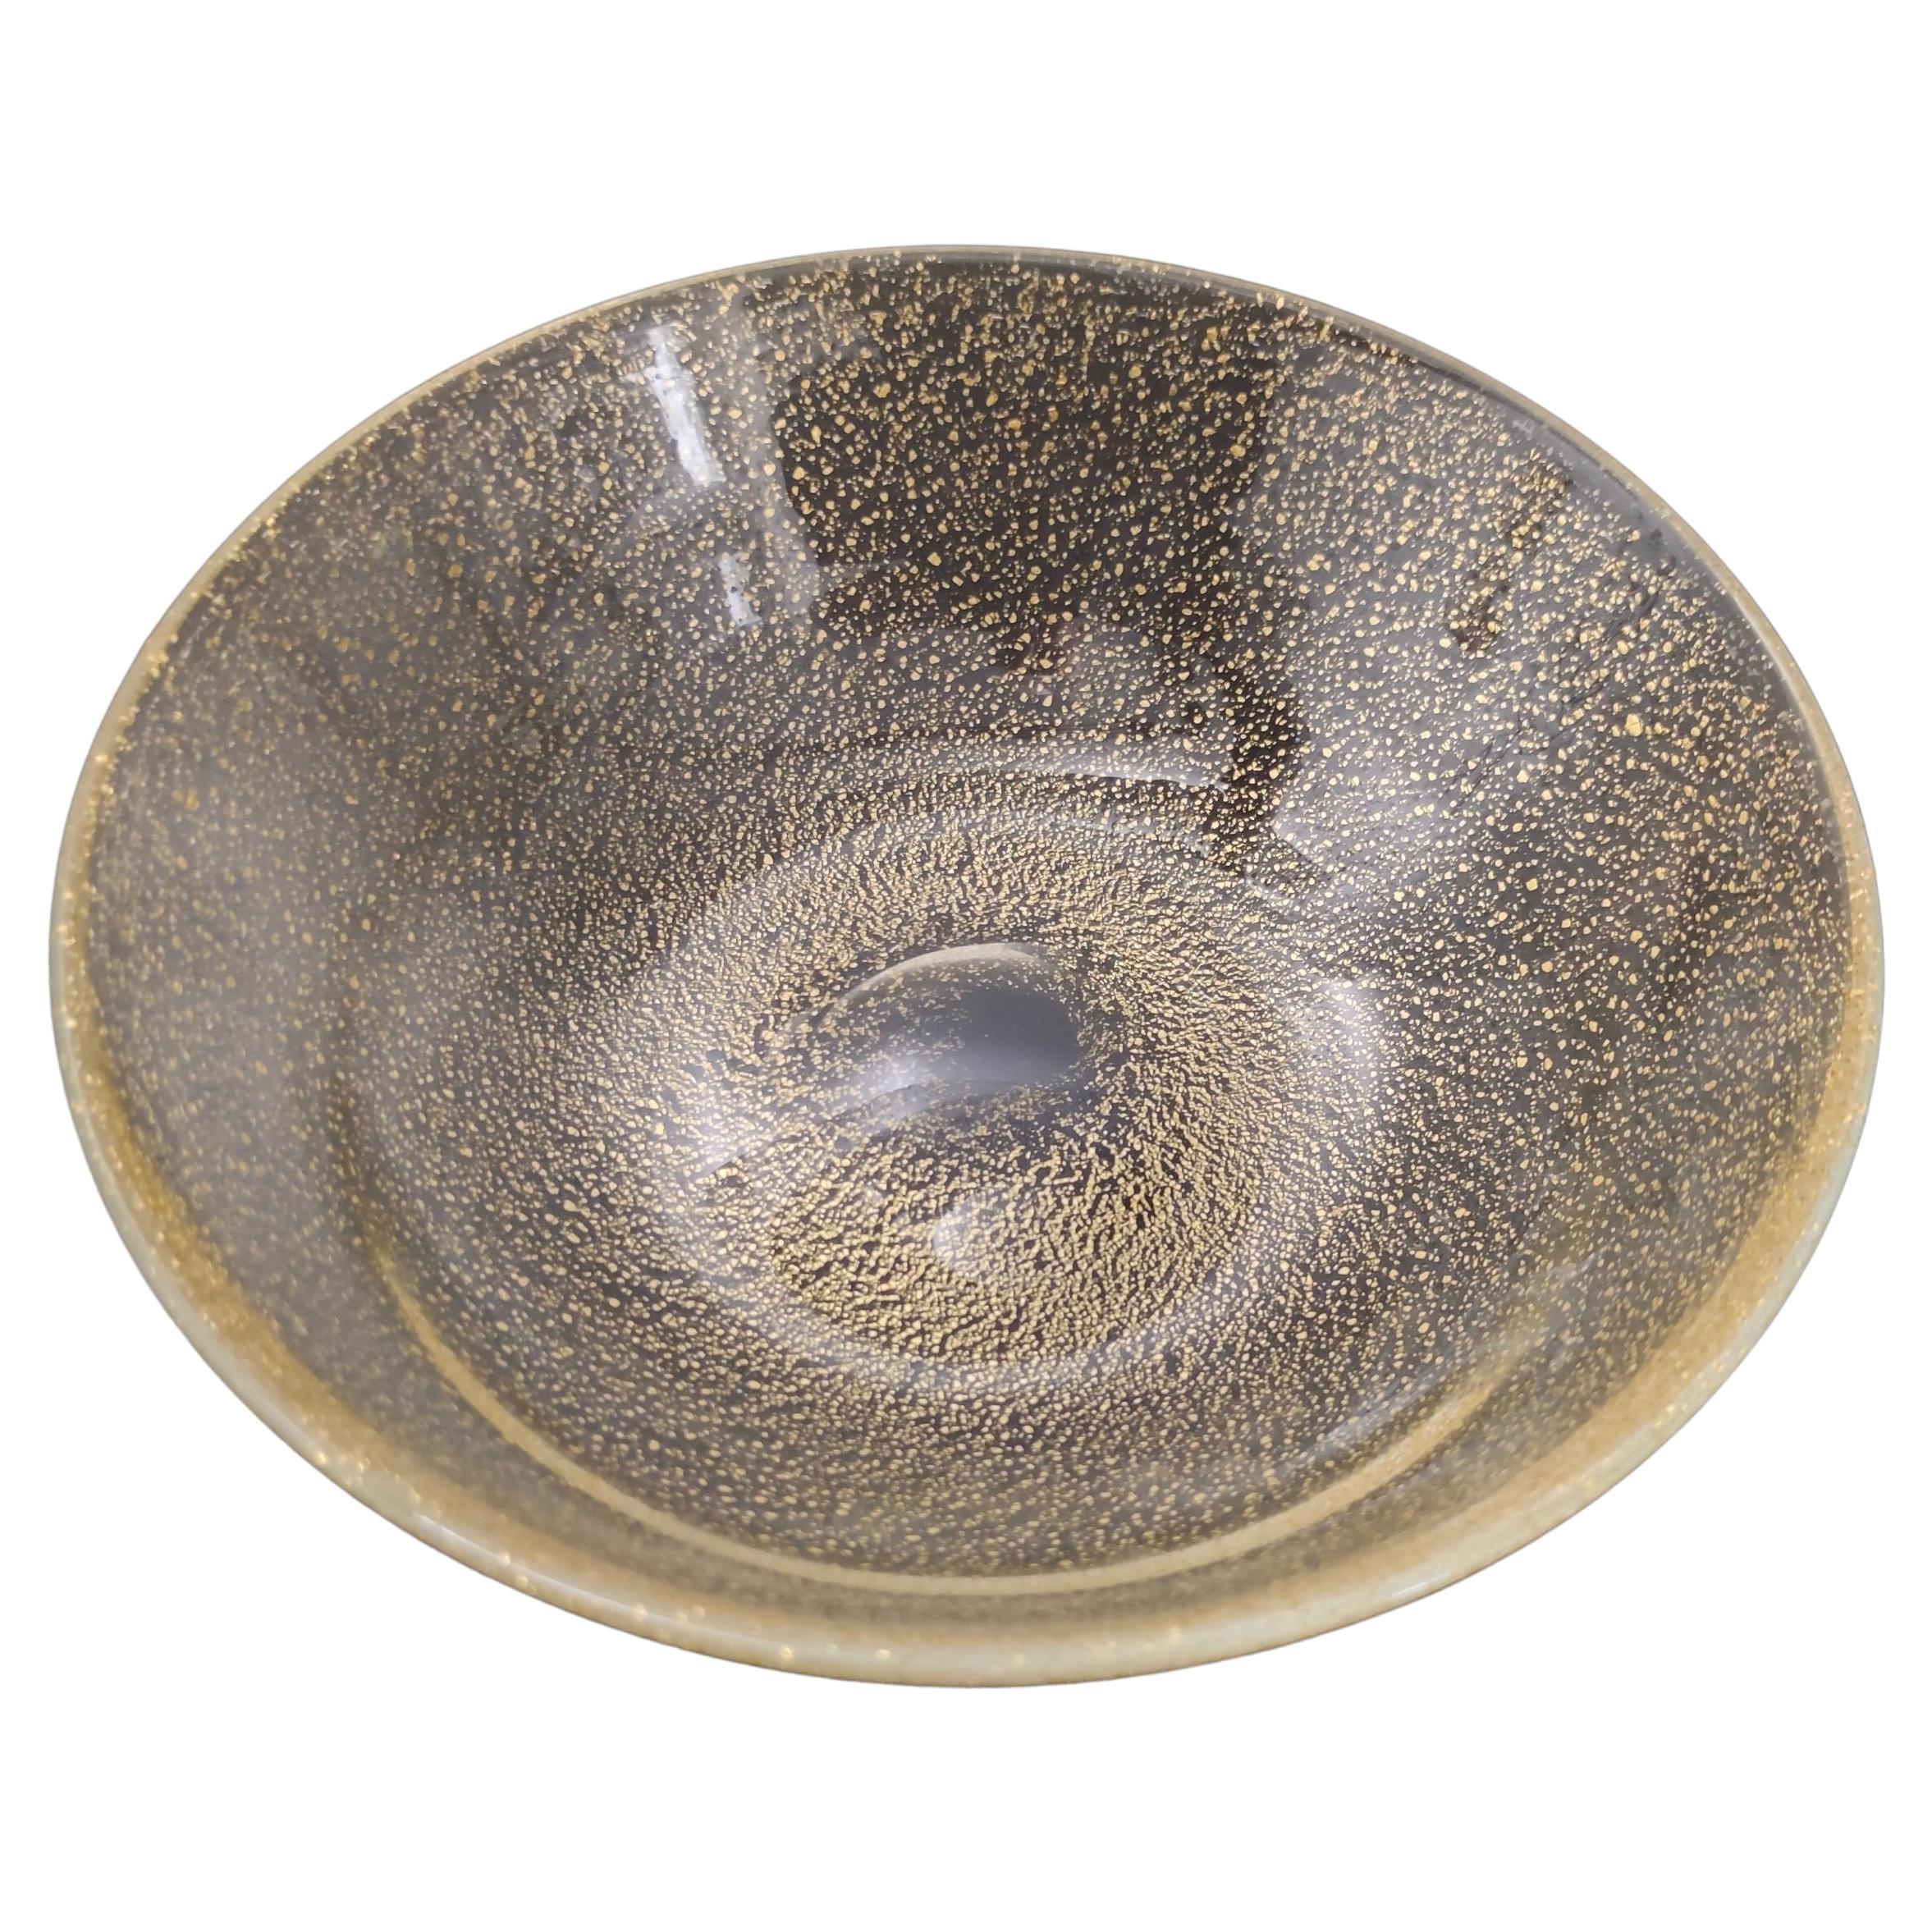 Made in Italy, 1970s.
This bowl or vide-poche is made in Murano glass and features gold fleck inclusion. 
It may show slight traces of use since it's vintage, but it can be considered as in excellent original condition and ready to become a piece in